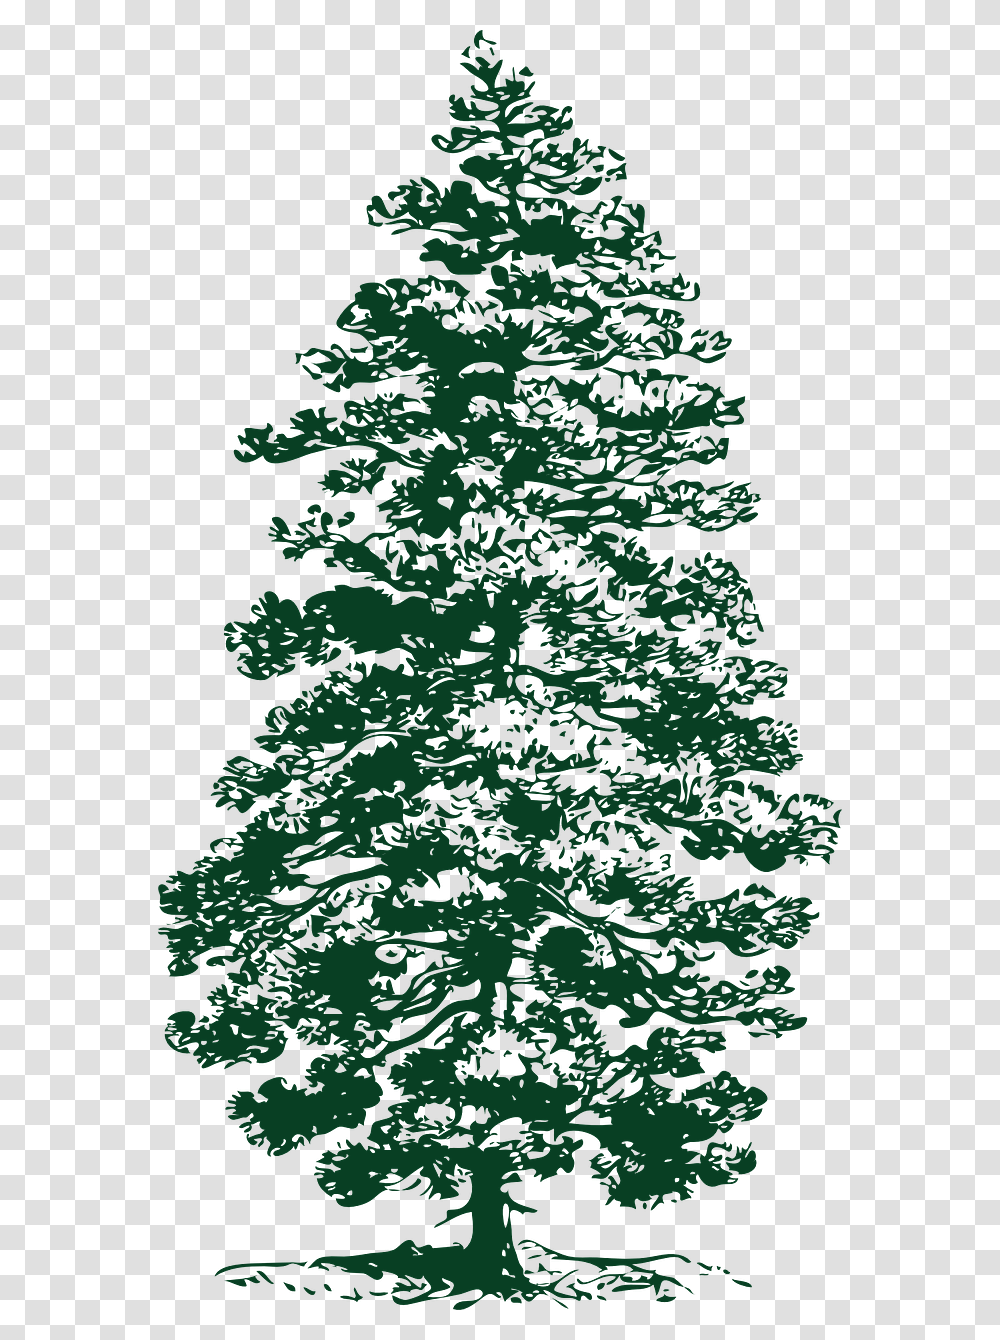 Evergreen Tree Clipart Black And White Pine Tree Ink Drawing, Plant, Fir, Conifer, Ornament Transparent Png